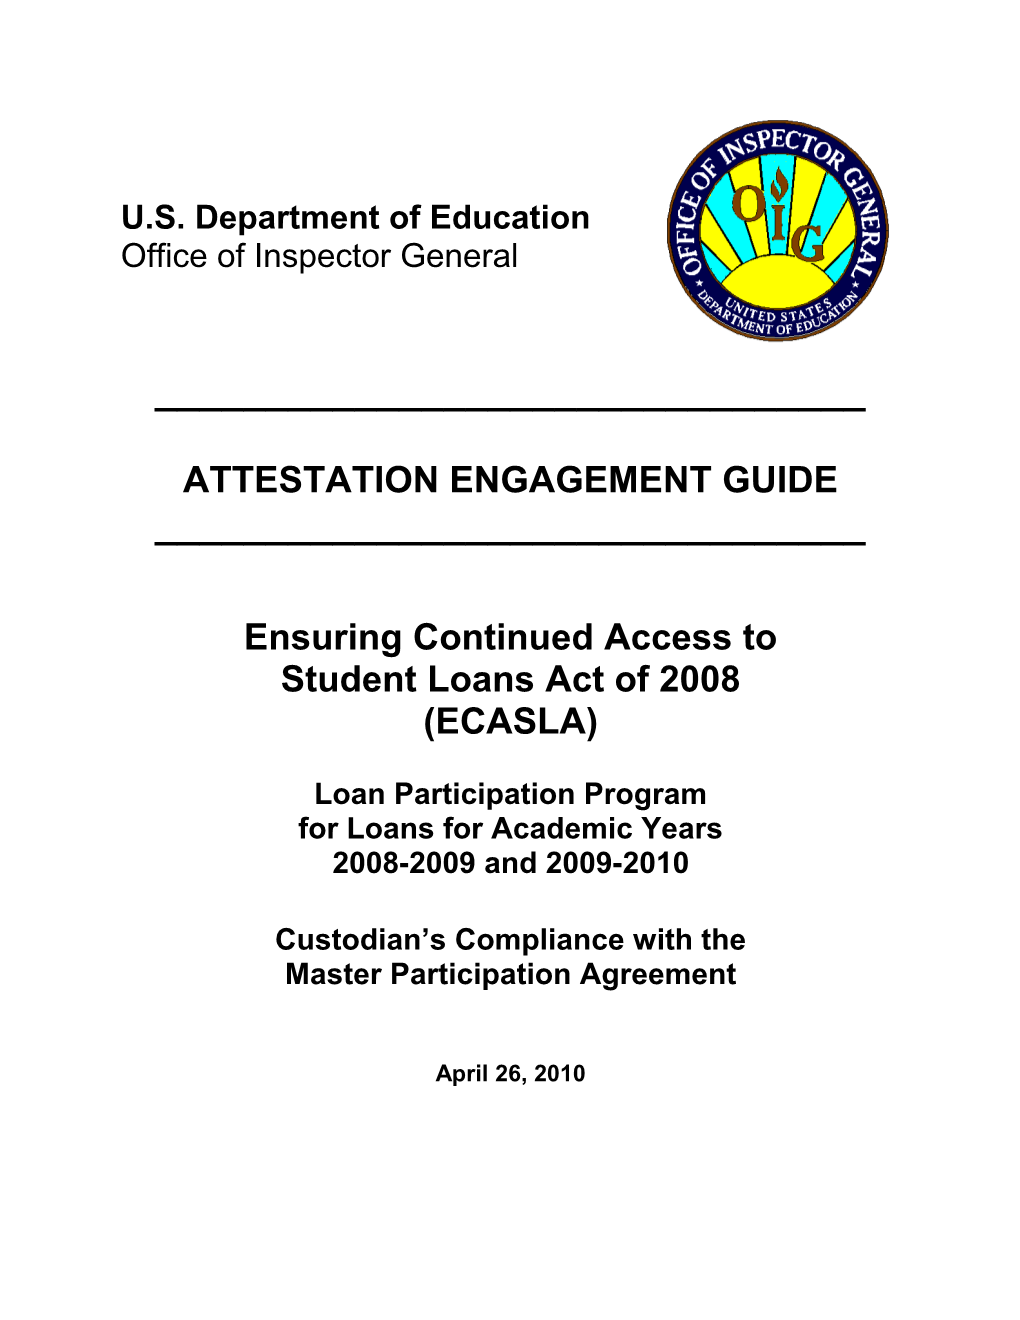 Ensuring Continued Access to Student Loans Act of 2008 (ECASLA) (MS Word)